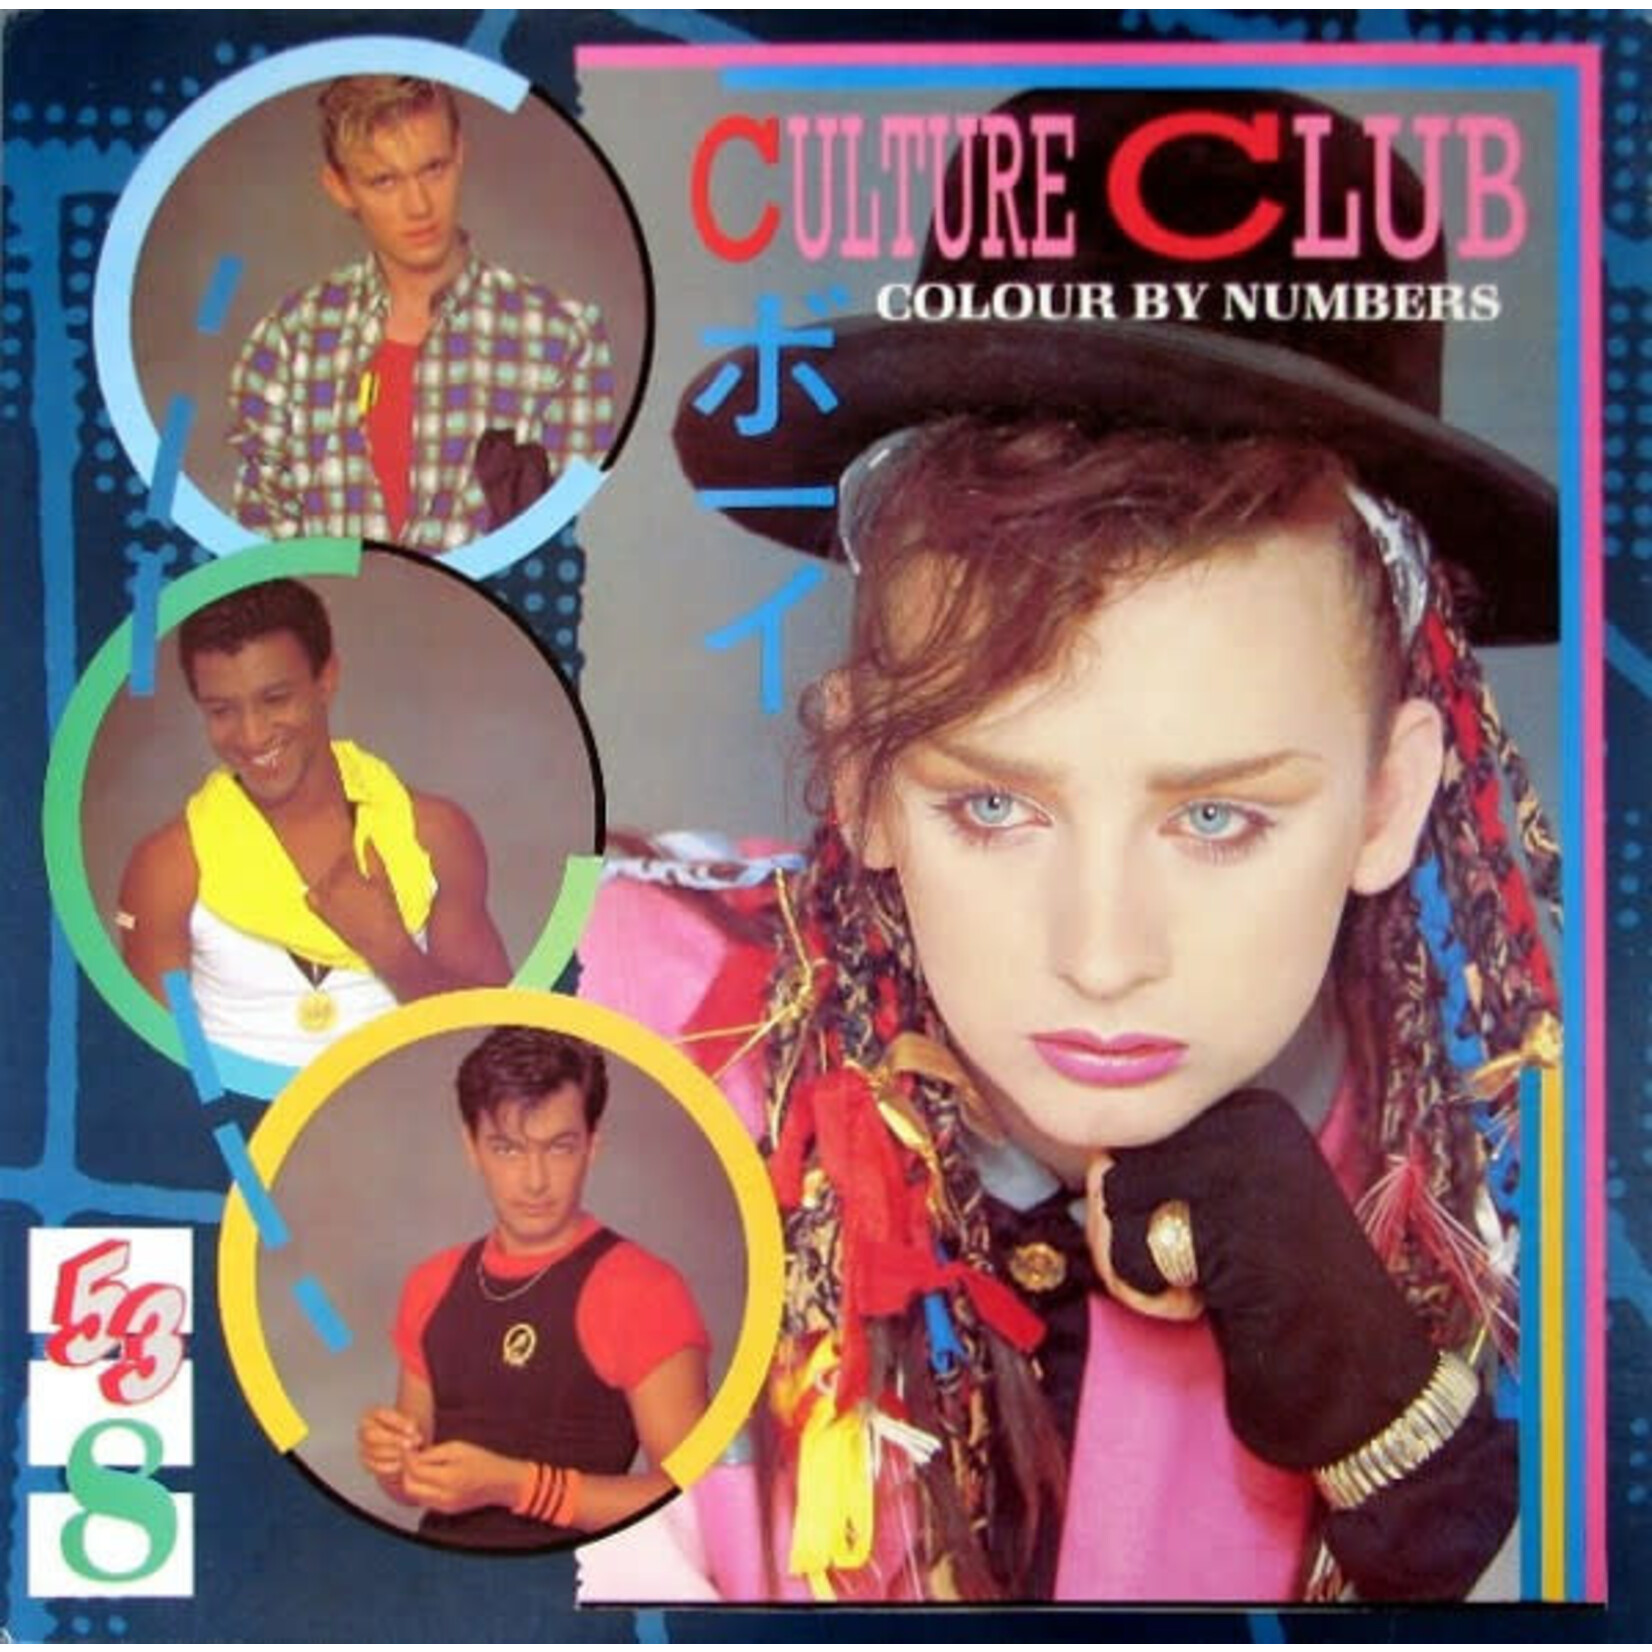 [Vintage] Culture Club - Colour by Numbers